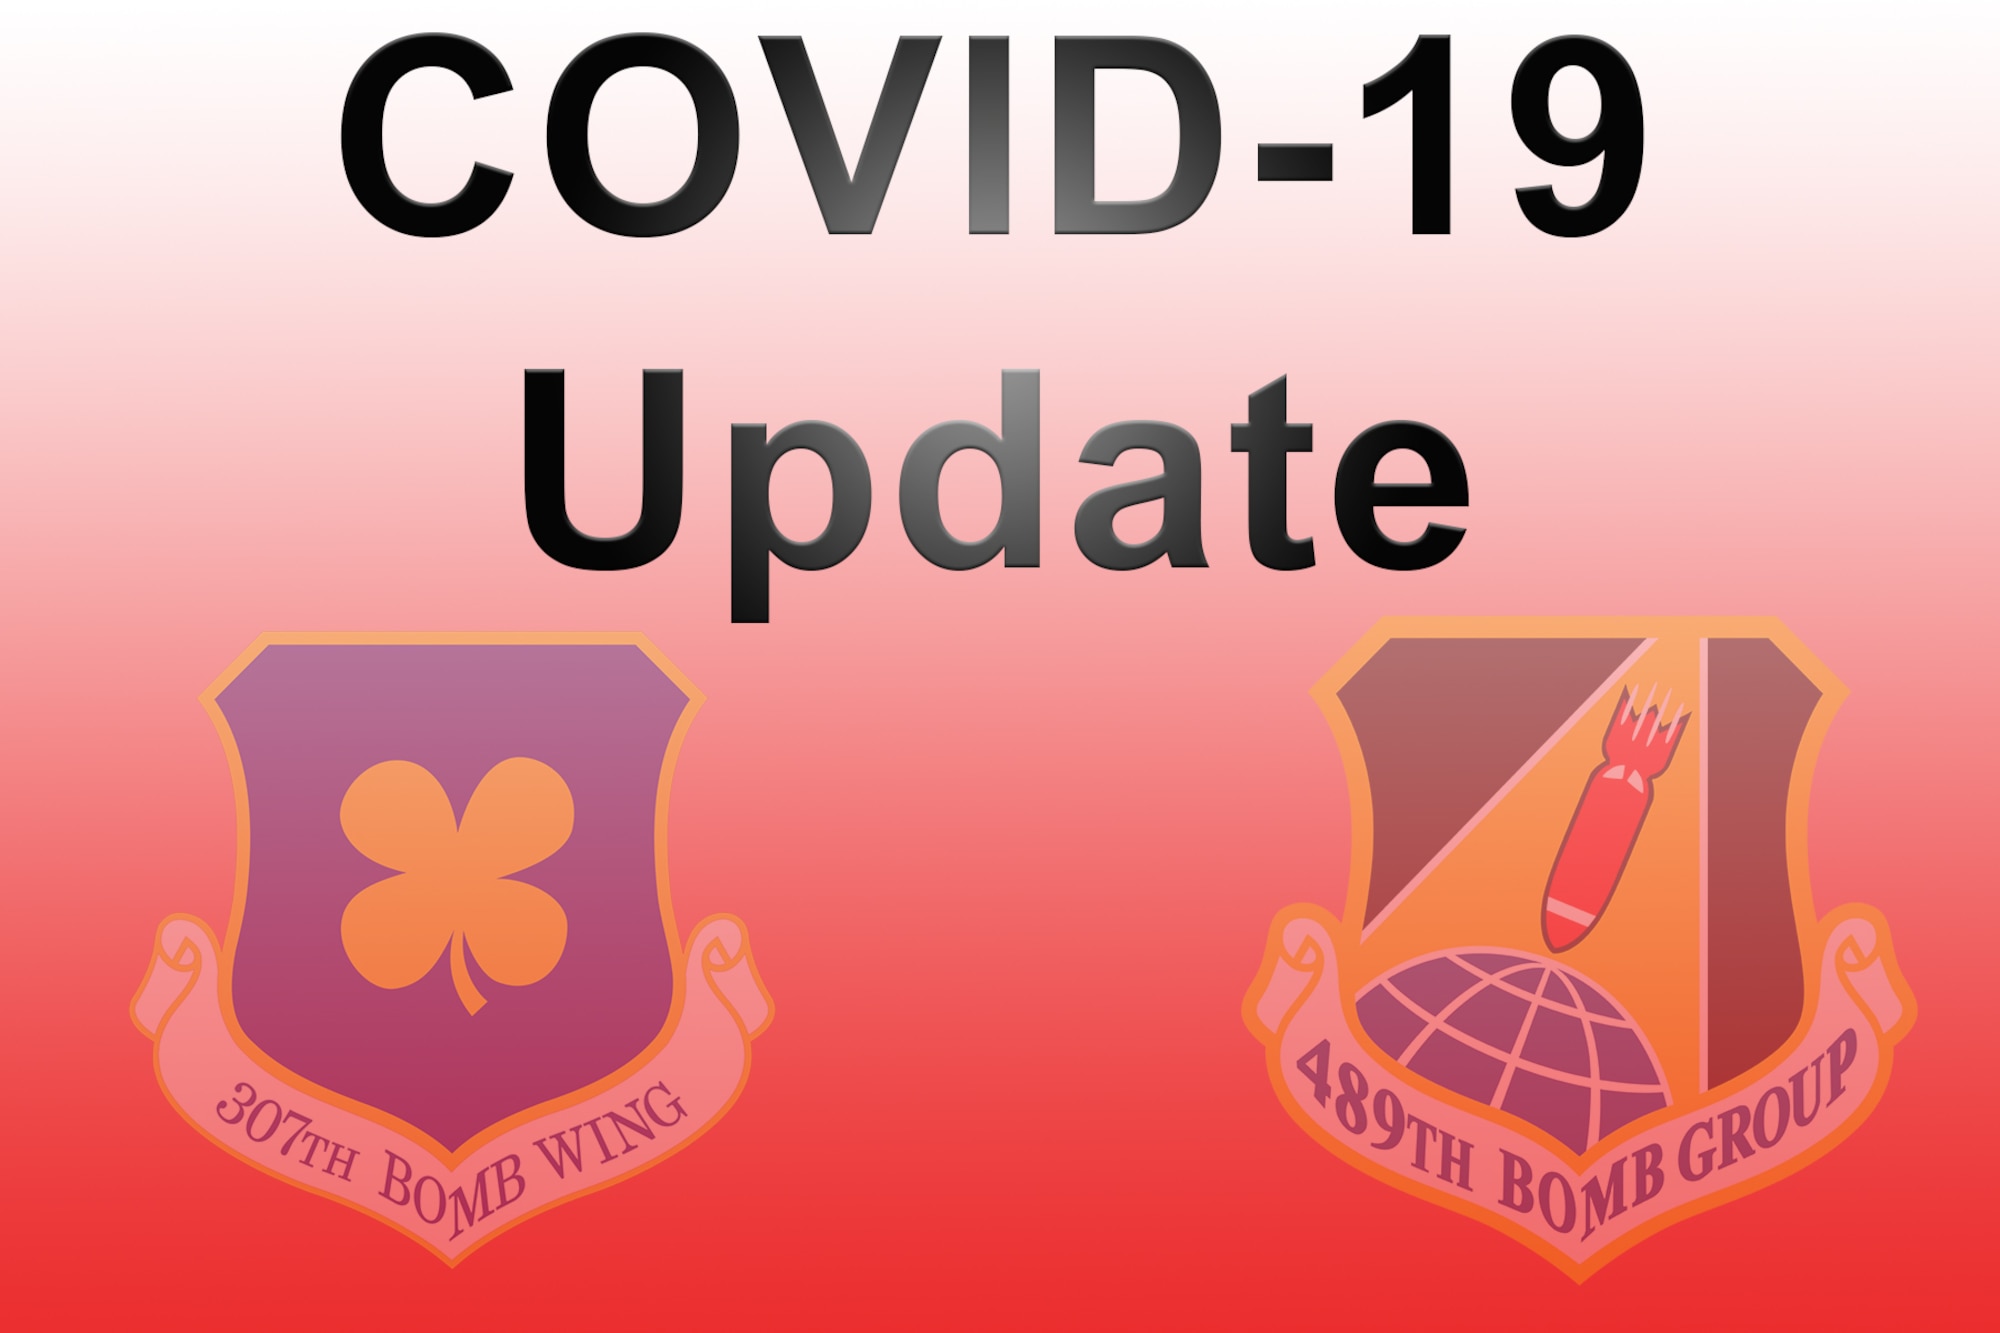 A graphic illustration with COVID-19 update text.